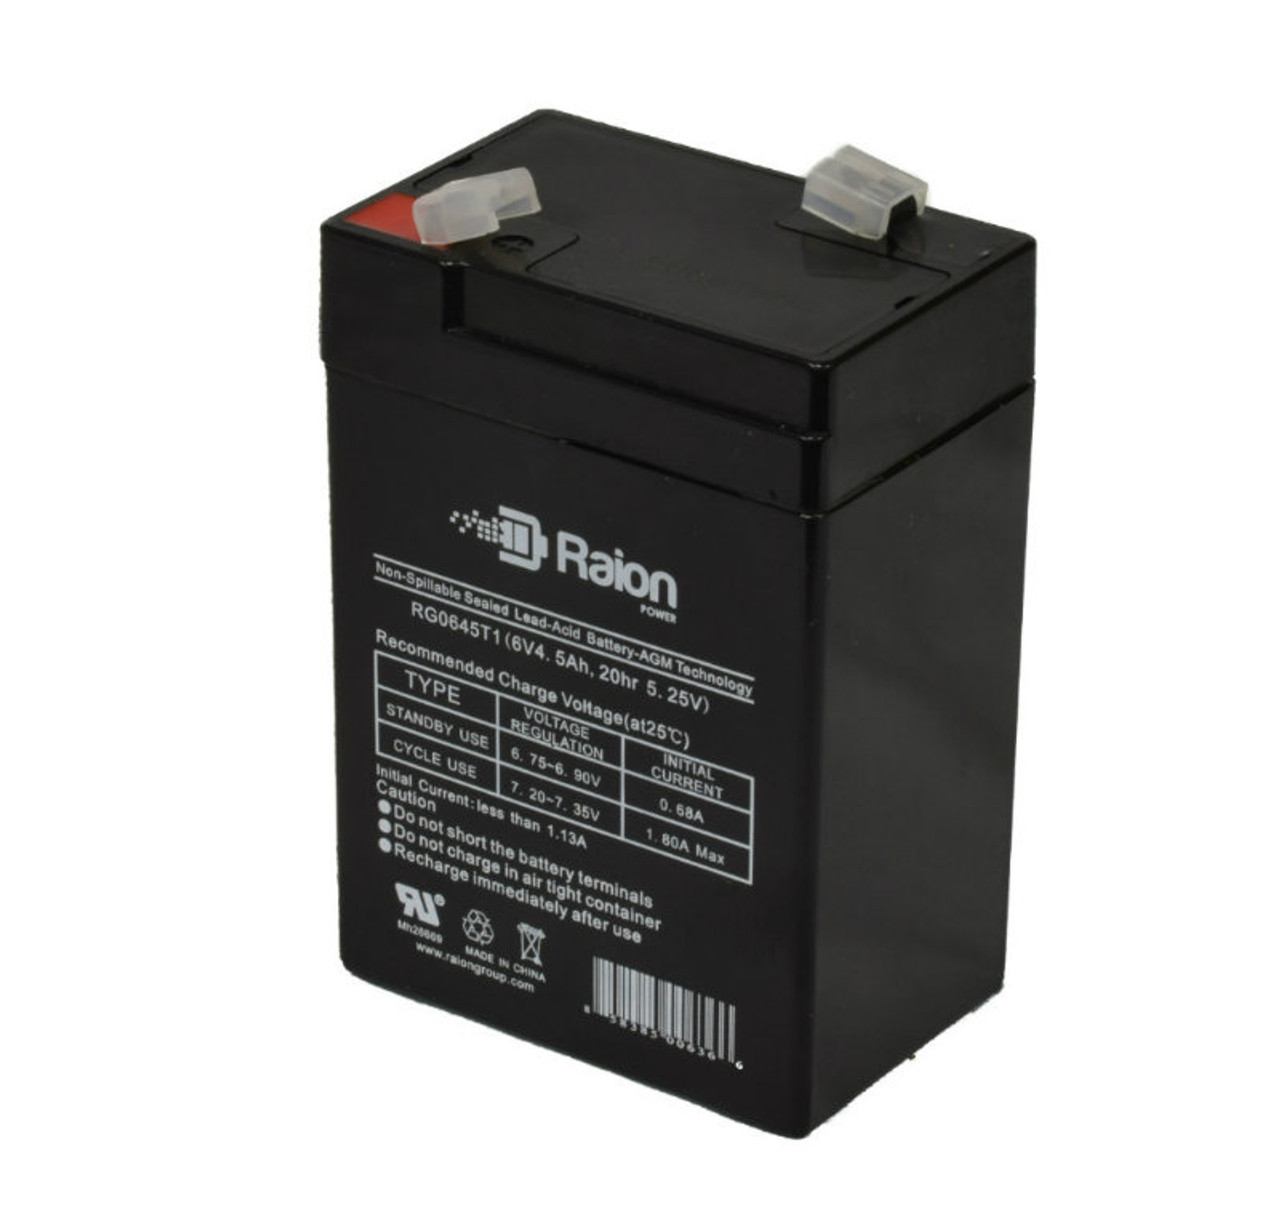 Raion Power RG0645T1 6V 4.5Ah Replacement Battery Cartridge for Criticare Systems End/TLC02 Pulse Oximeter